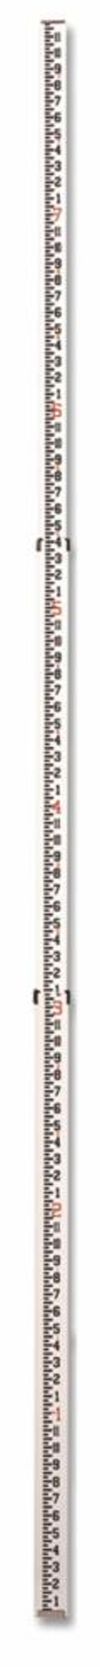 CST Berger 8 Ft. Aluminum Telescoping Rod 3-Section Inches / 8ths, small